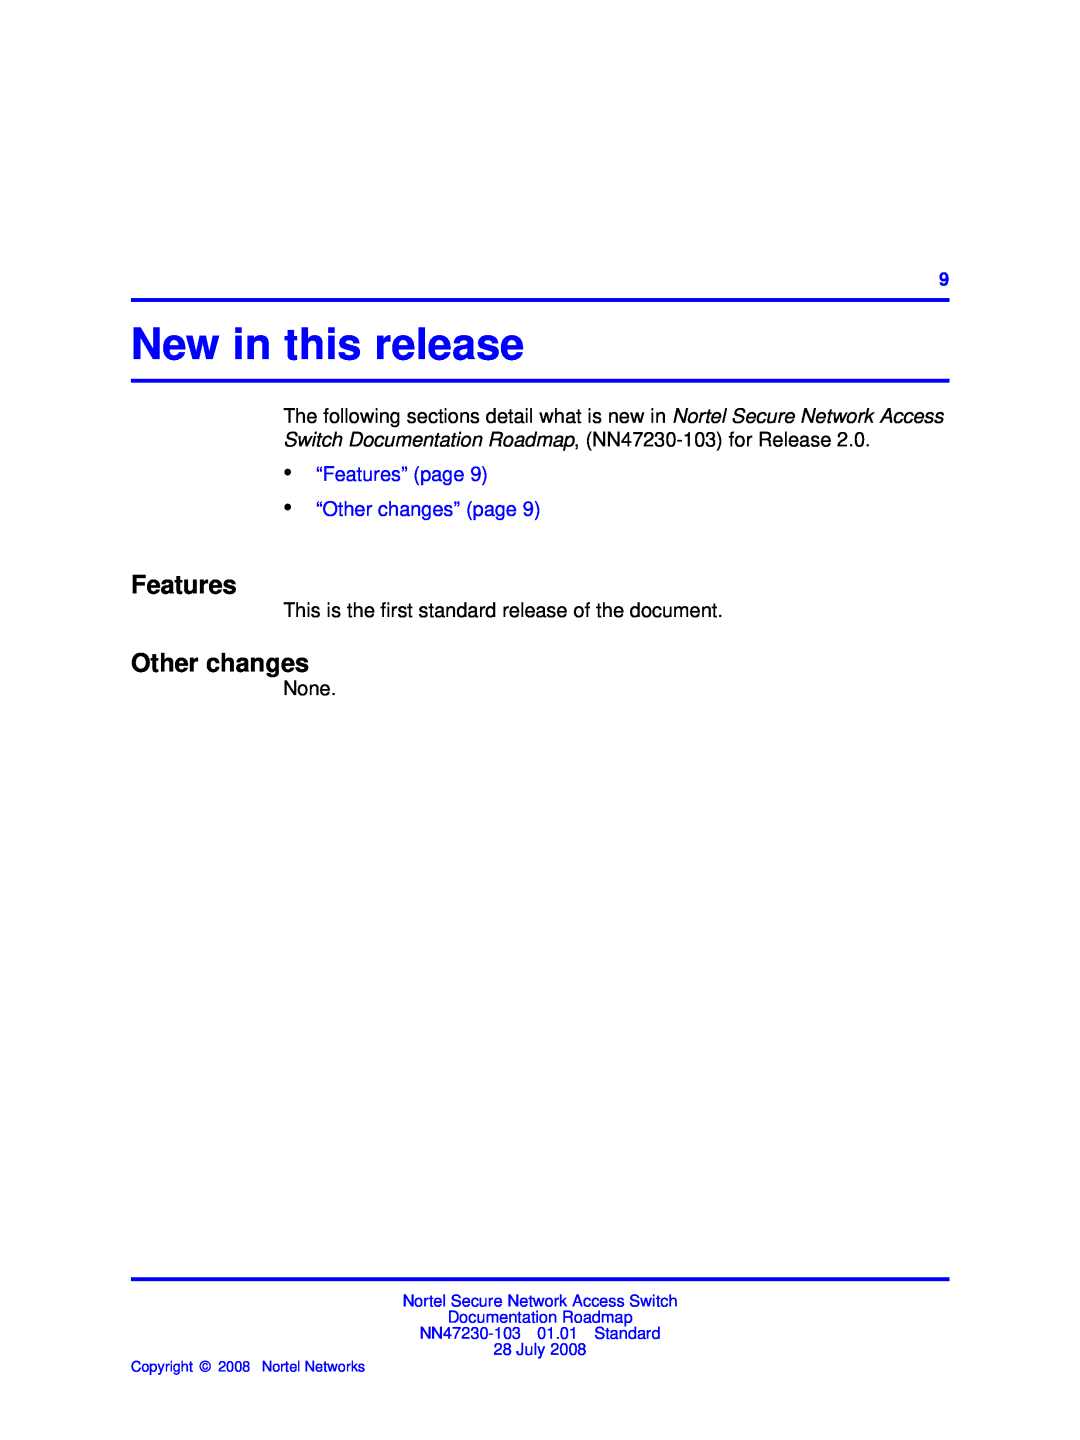 Nortel Networks NN47230-103 manual New in this release, “Features” page “Other changes” page 